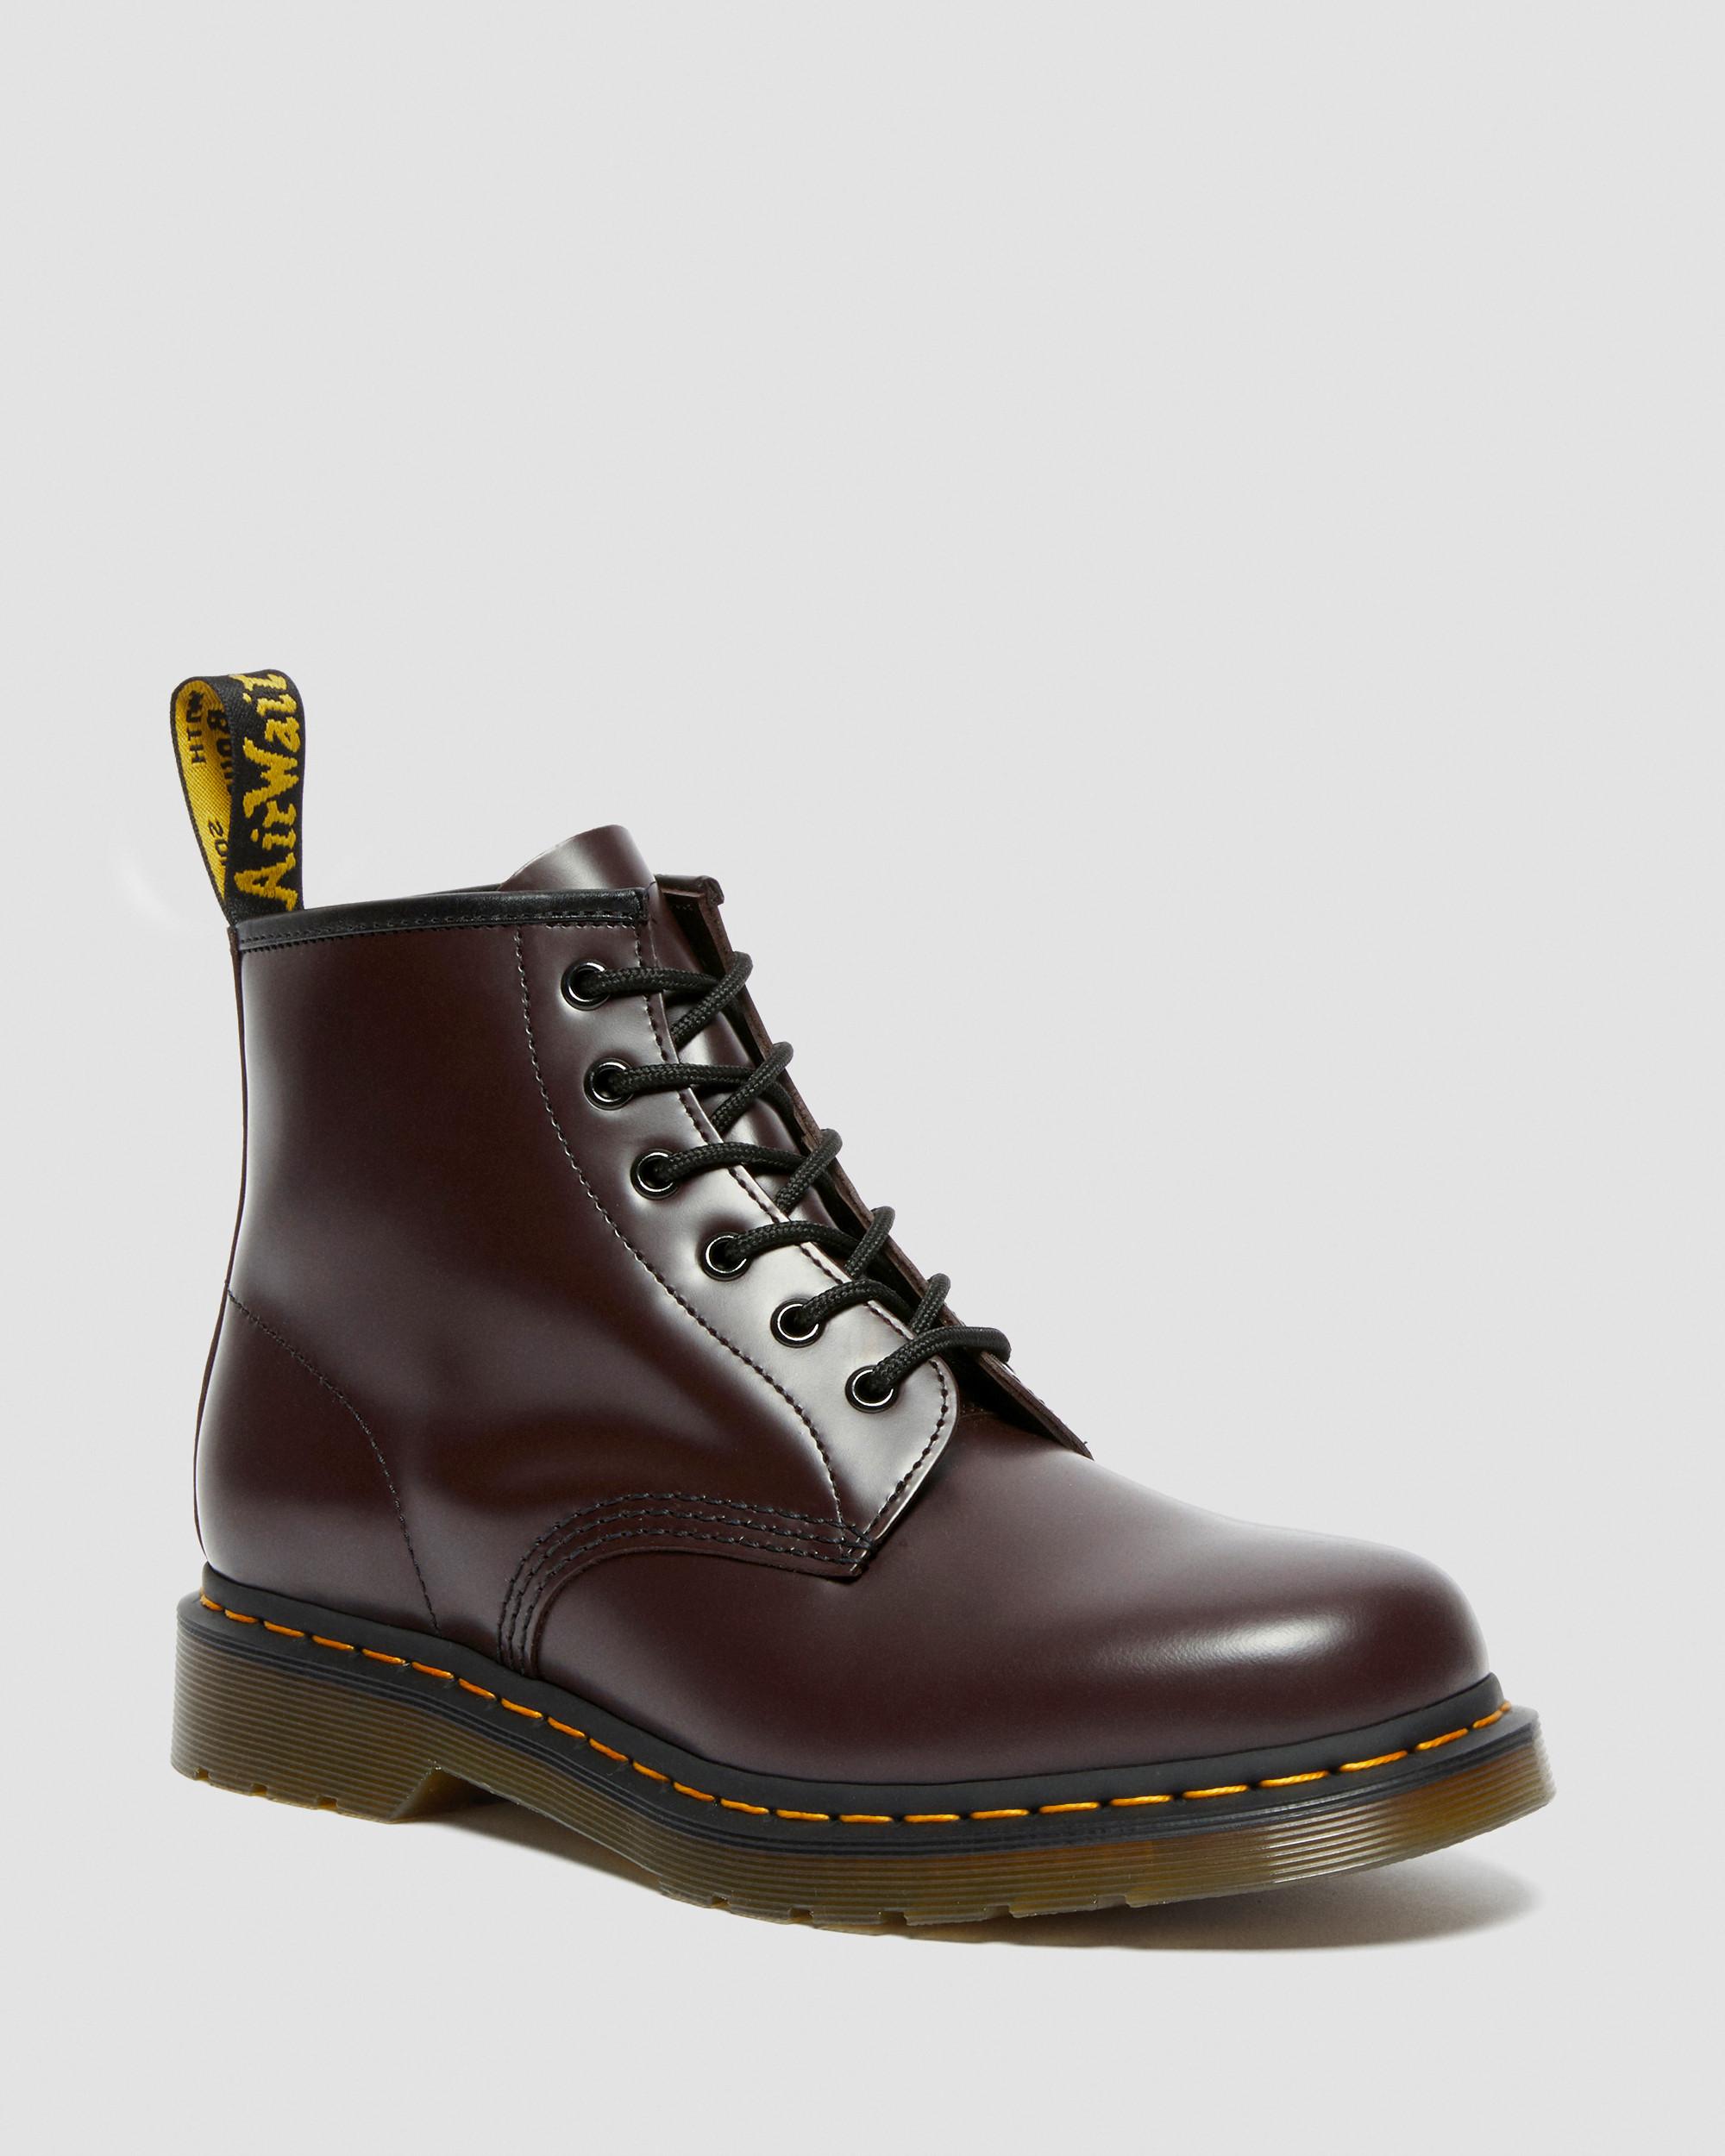 101 Yellow Stitch Smooth Leather Ankle Boots in Black | Dr. Martens